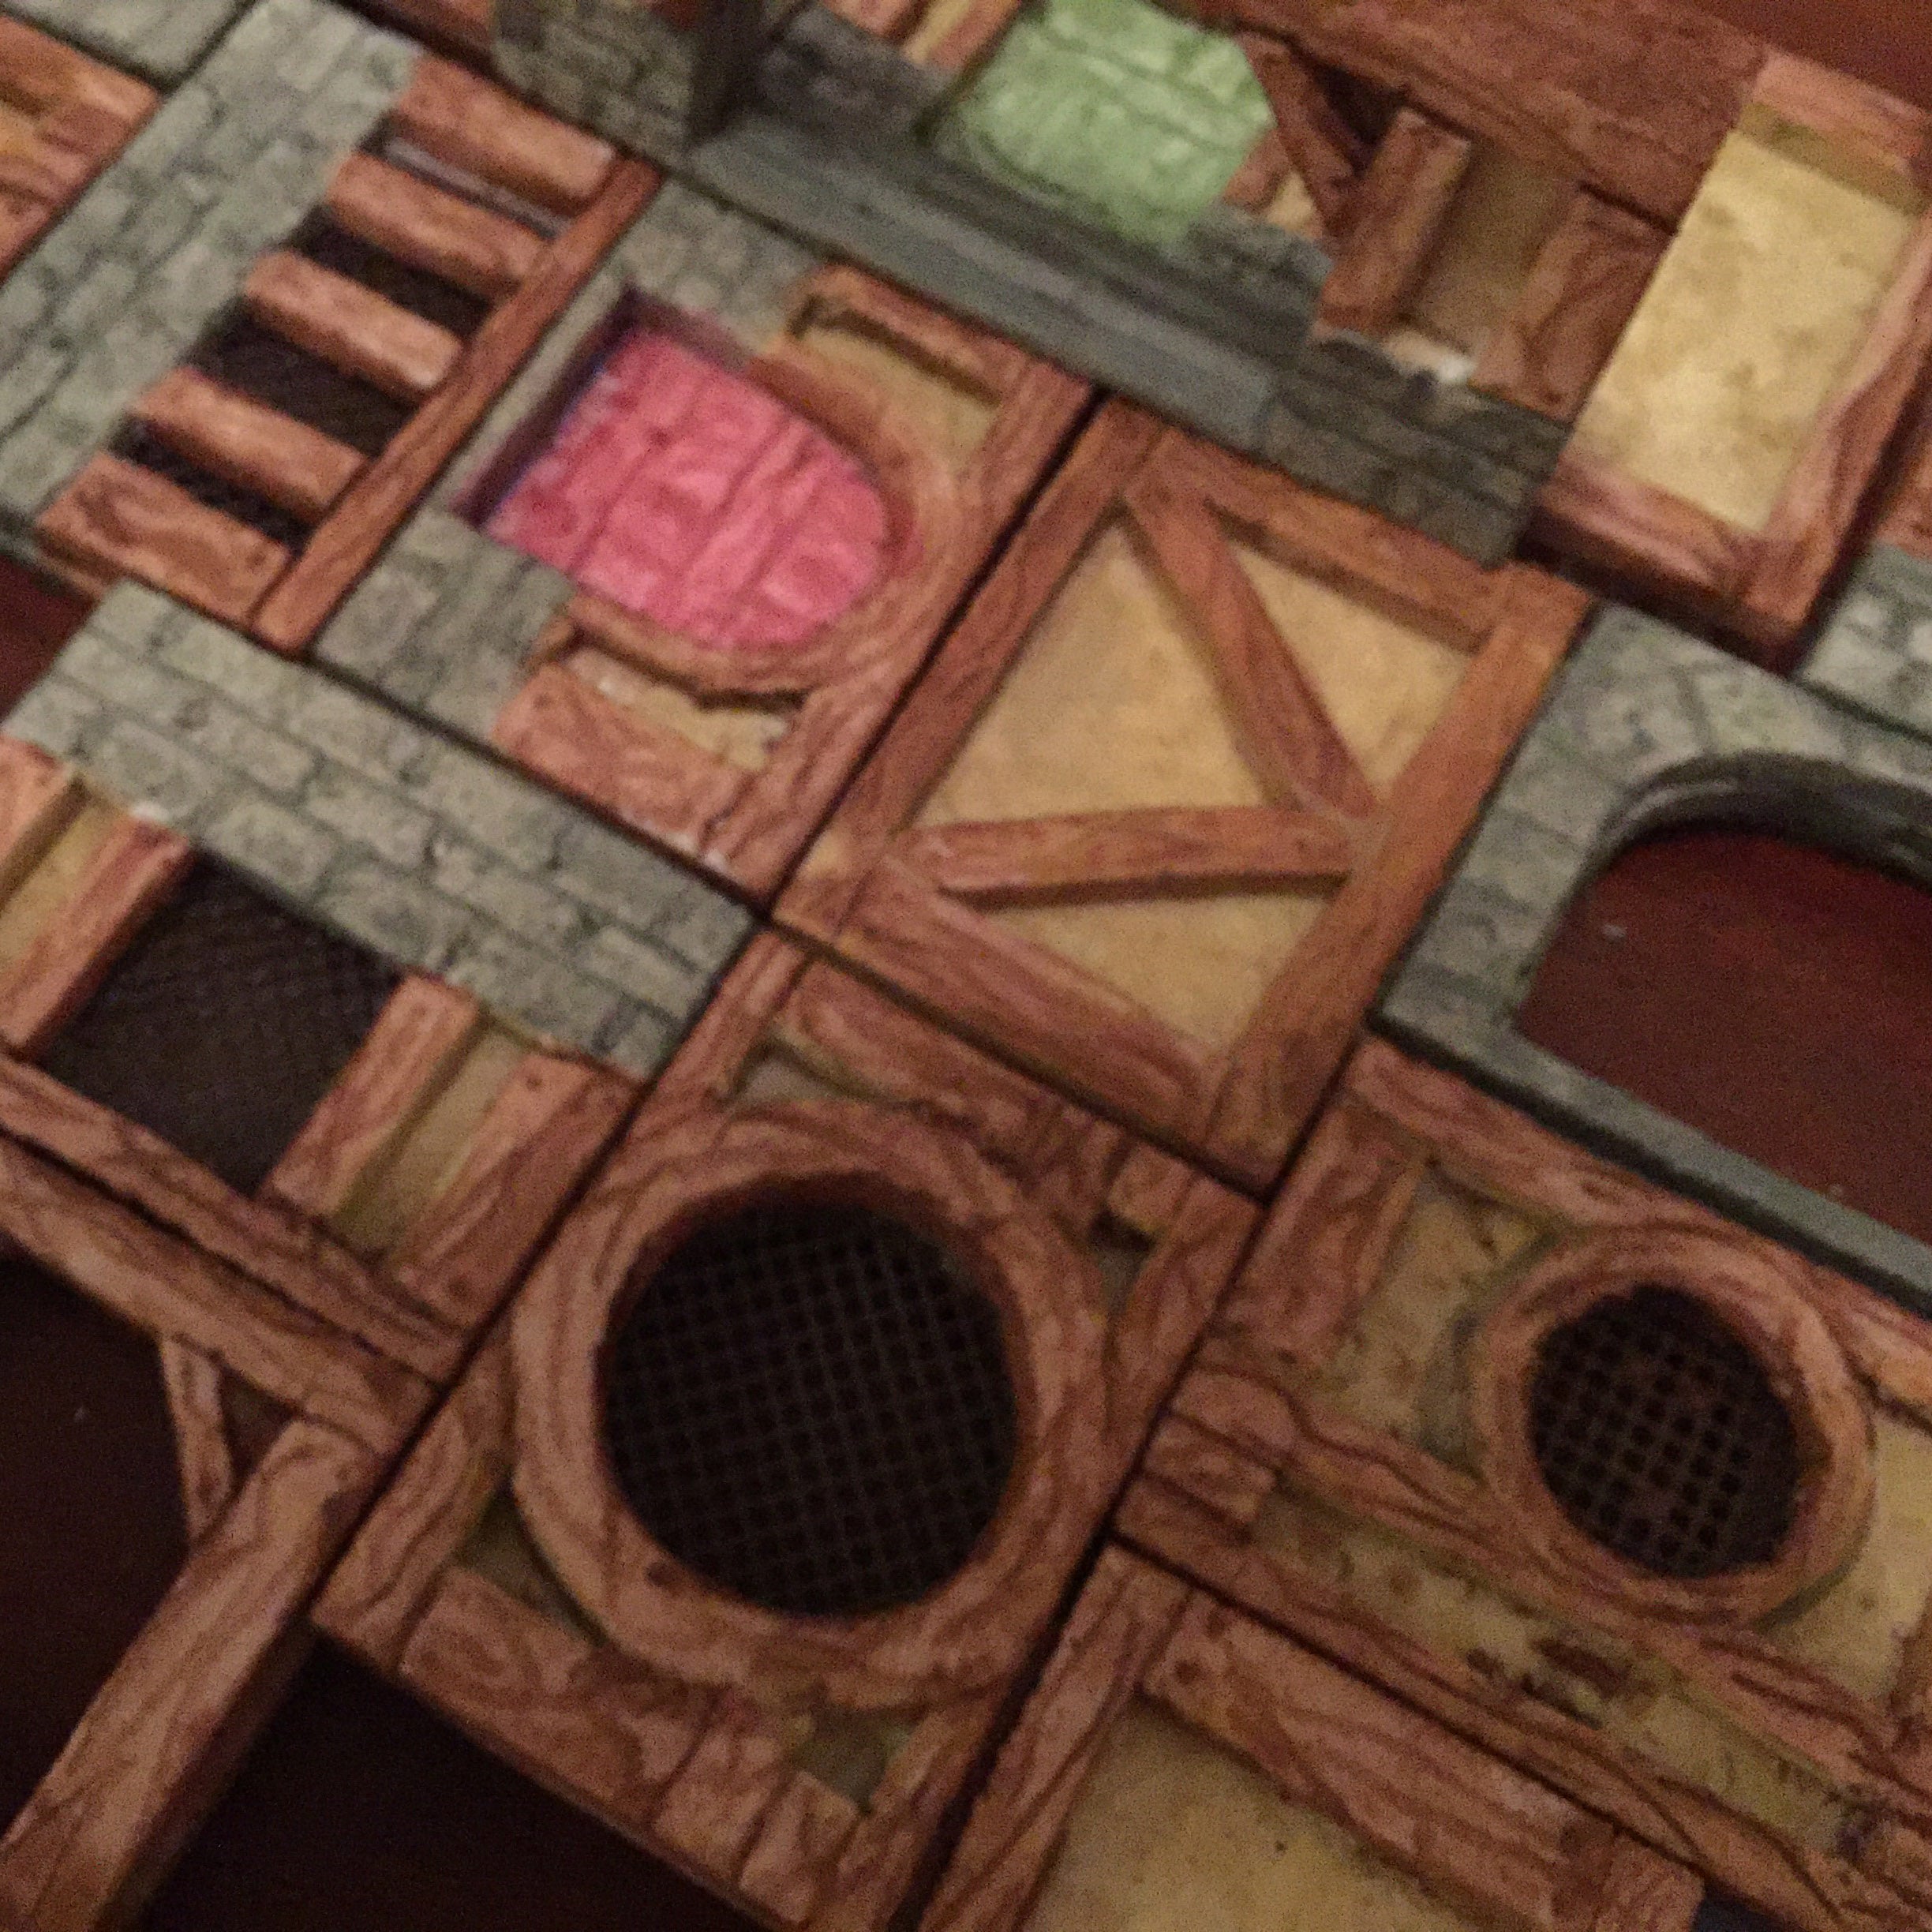 TERRAINO tabletop terrain is modular. Build terrain pieces once. Use in endless combinations.